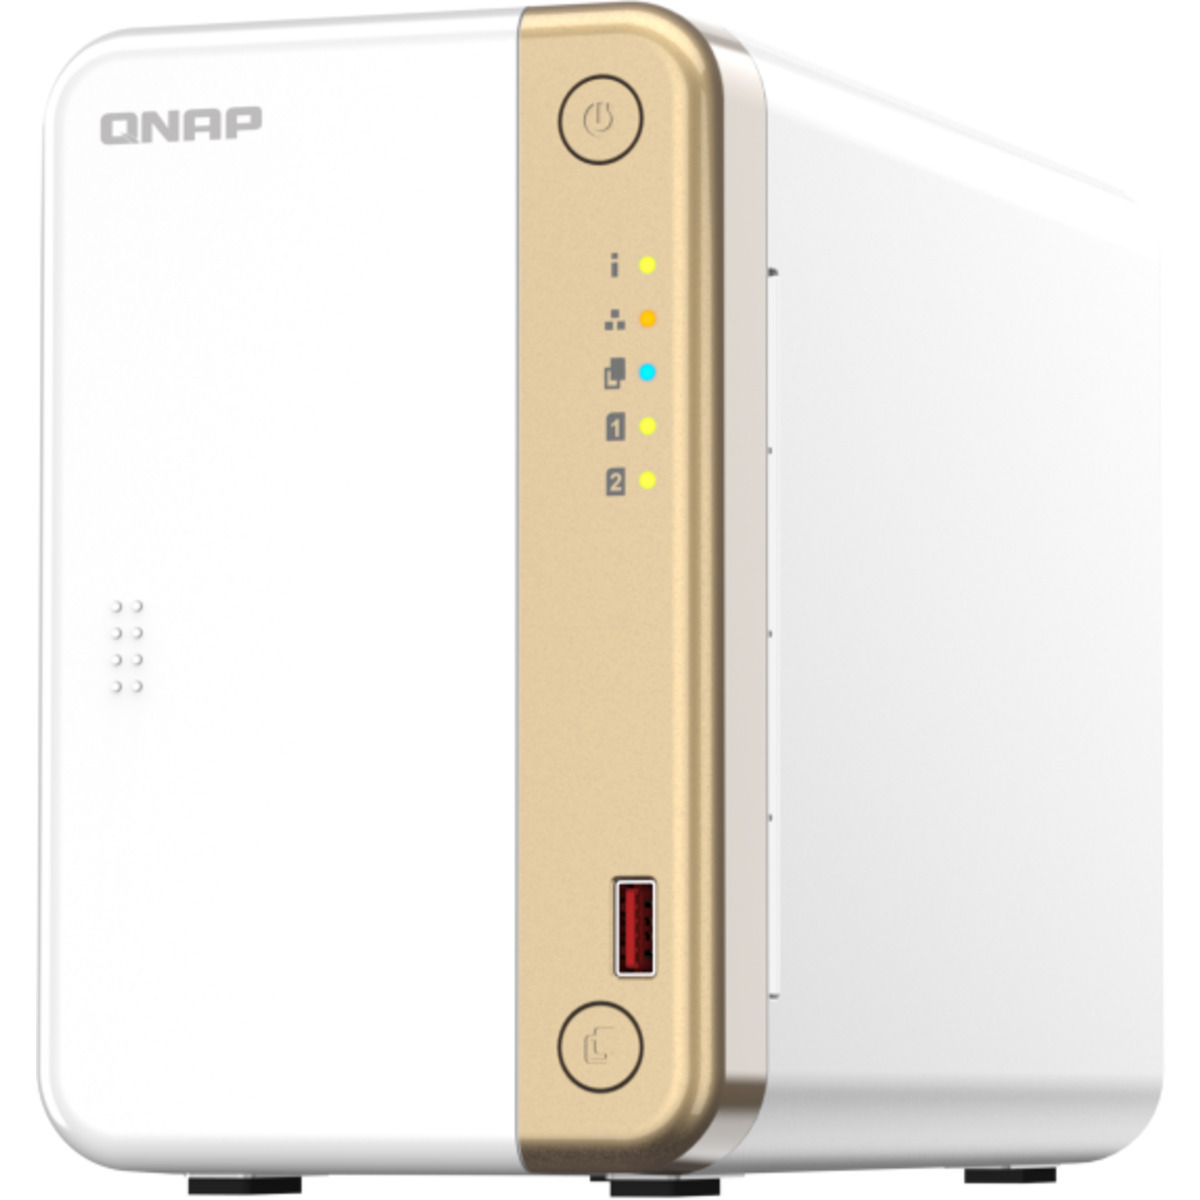 QNAP TS-262 8tb 2-Bay Desktop Personal / Basic Home / Small Office NAS - Network Attached Storage Device 2x4tb Sandisk Ultra 3D SDSSDH3-4T00 2.5 560/520MB/s SATA 6Gb/s SSD CONSUMER Class Drives Installed - Burn-In Tested TS-262